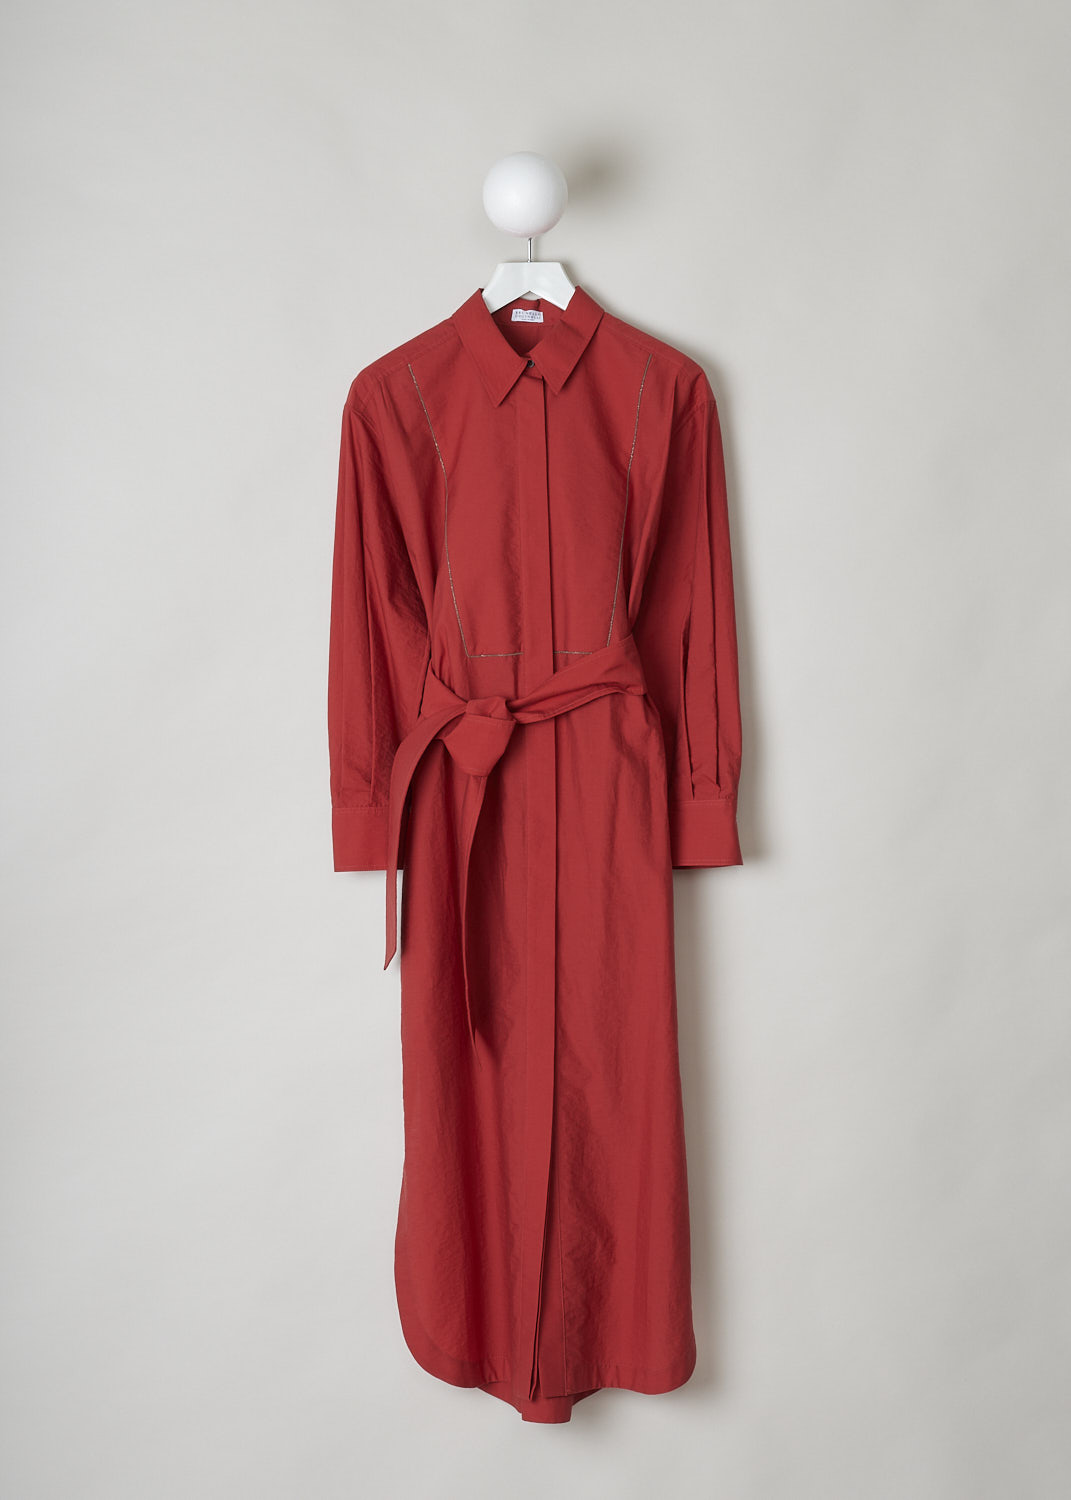 BRUNELLO CUCINELLI, RED SHIRT DRESS WITH MONILI TRIM, M0F79A4933_C2995, Red, Front, This red maxi dress has a classic collar and a concealed front button closure going down the length of the dress. The long sleeves have buttoned cuffs. The front of the dress is subtly decorated with a monili beaded trim. The detachable belt in the same fabric can be used to cinch in the waist. Slanted pockets are concealed in the side seam. In the back, a single box pleat can be found in the centre. 